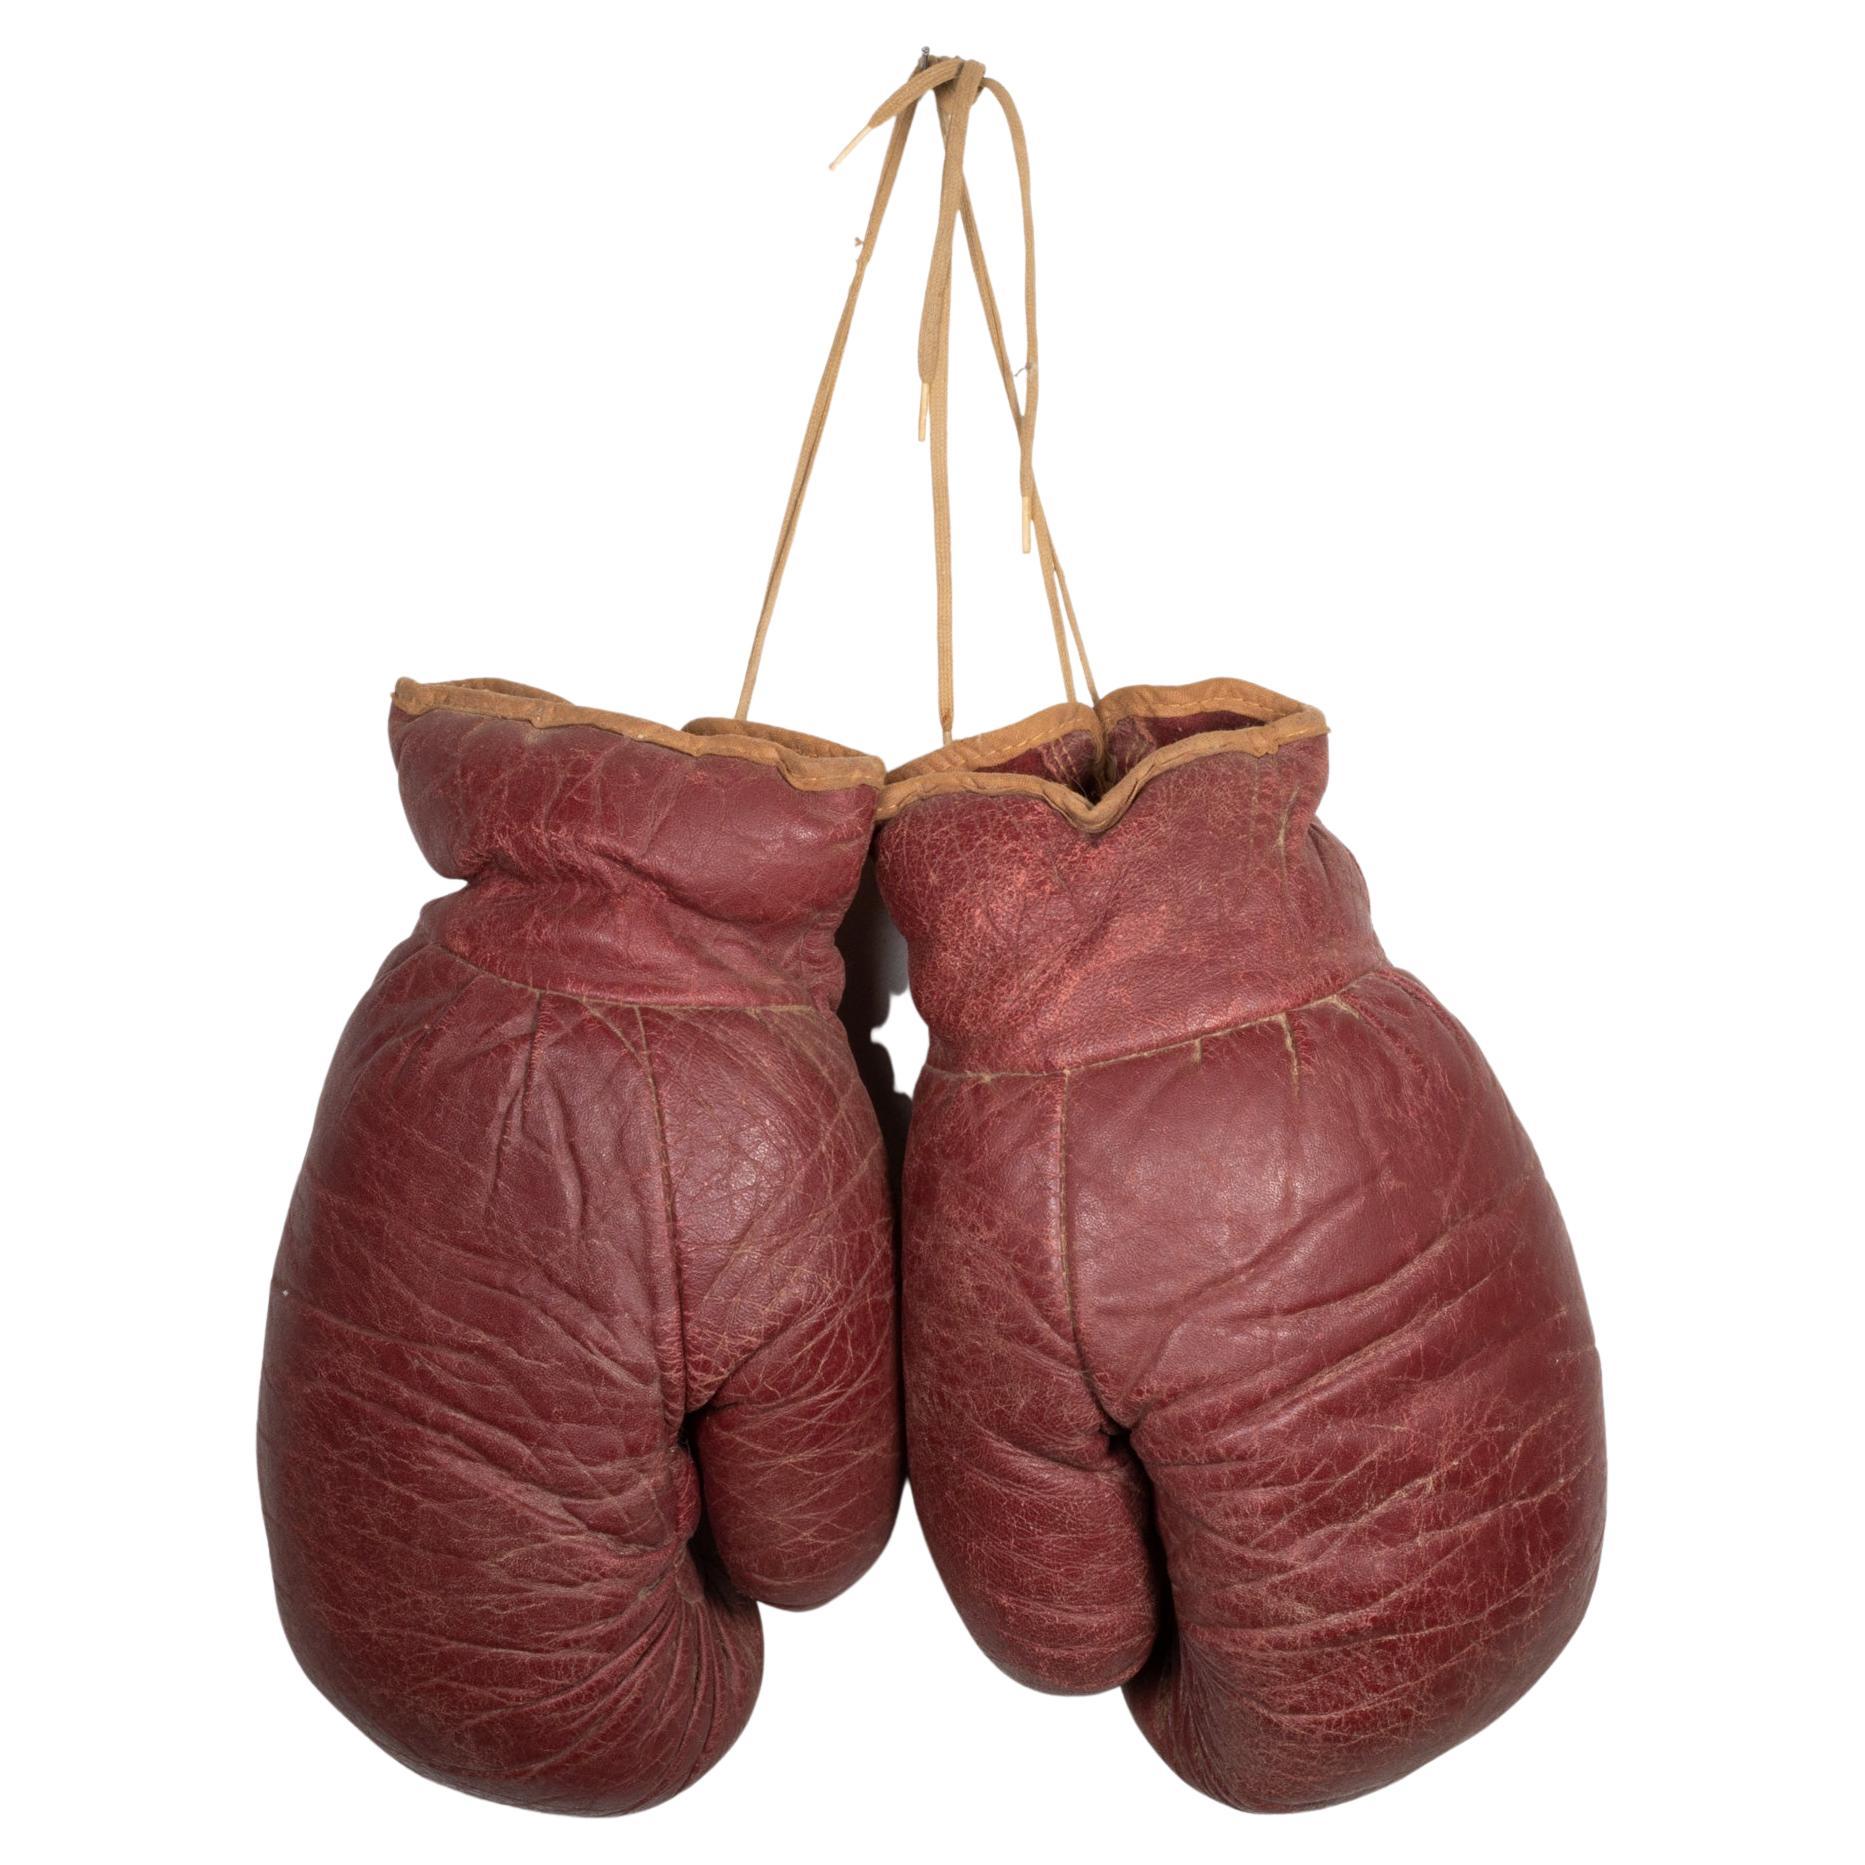 ABOUT

Original boxing gloves with reddish brown leather filled with horse hair. The leather is very soft and in good condition. .

 CREATOR Franklin.
 DATE OF MANUFACTURE c.1950-1960.
 MATERIALS AND TECHNIQUES Leather, Horse Hair.
 CONDITION